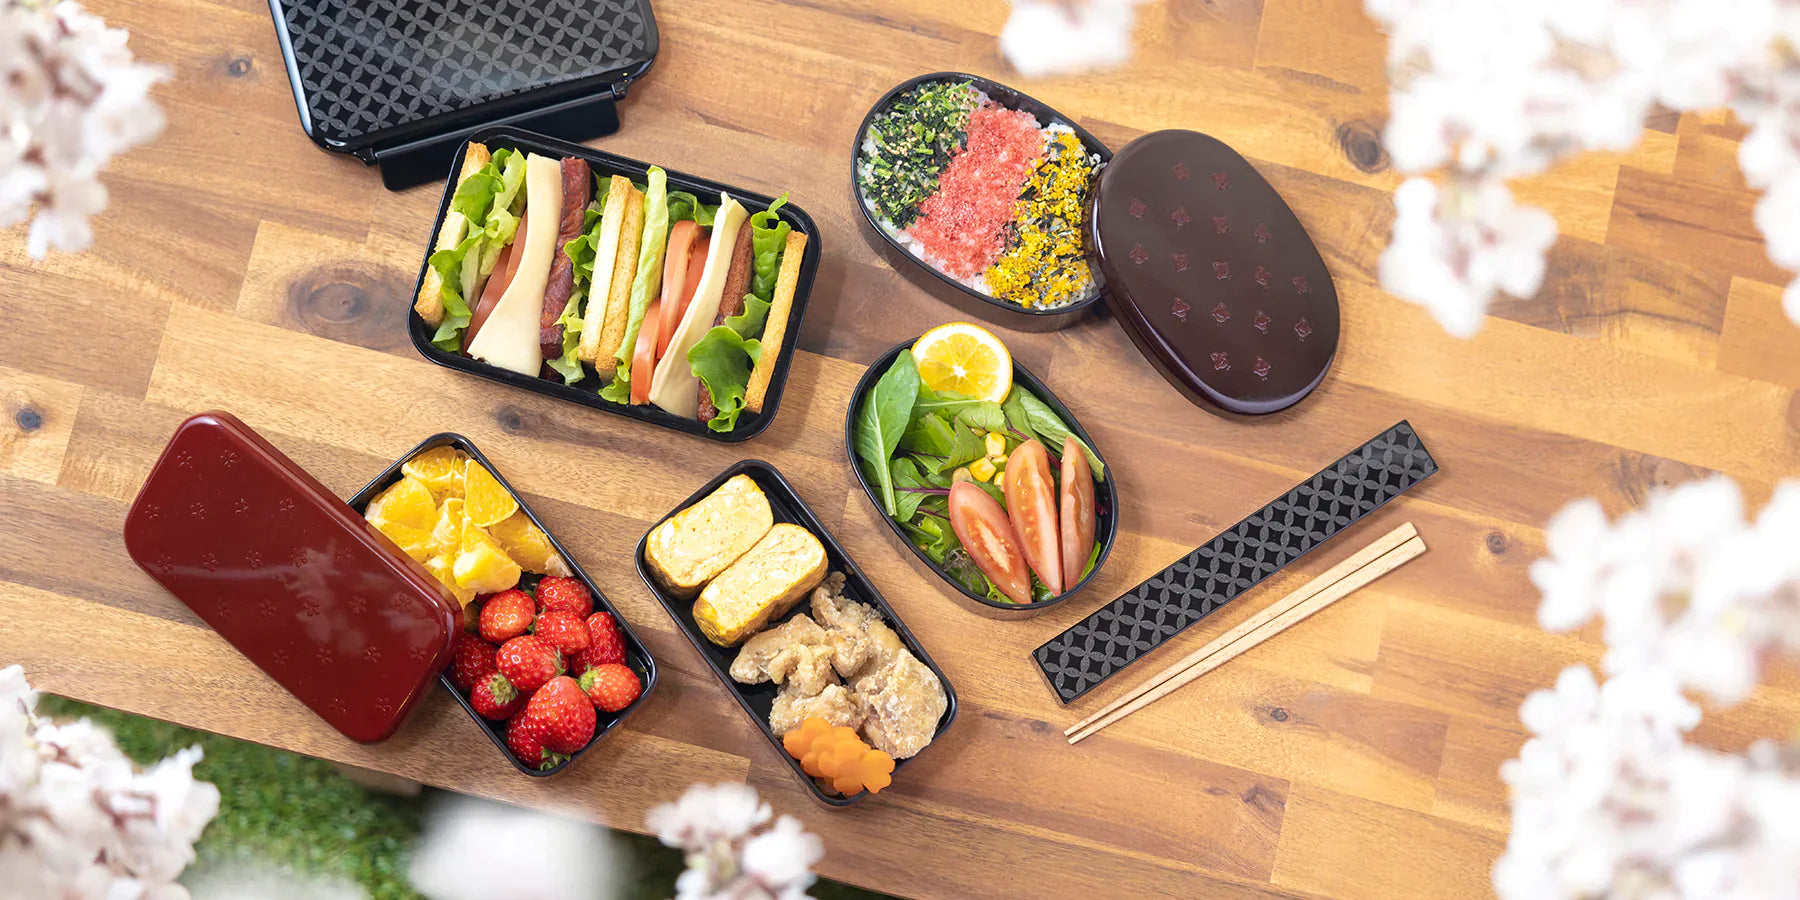 Discover our great selection of Lunch Boxes & Totes at Globalkitchen Japan.